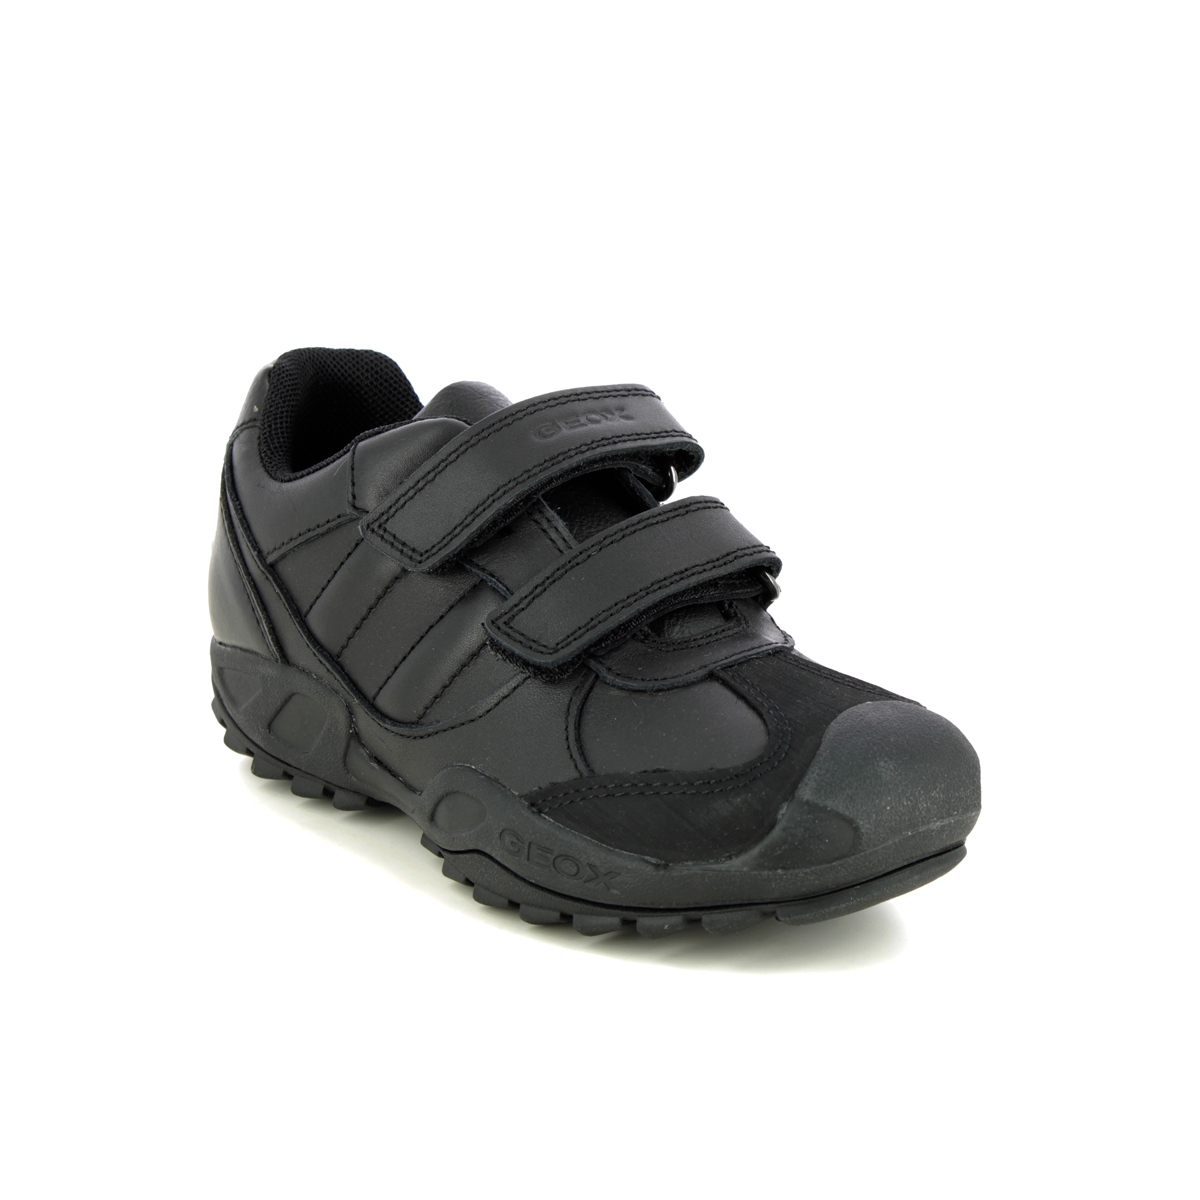 Geox - Savage Low Cut (Black Leather) J841Vb-C9999 In Size 38 In Plain Black Leather For School For kids